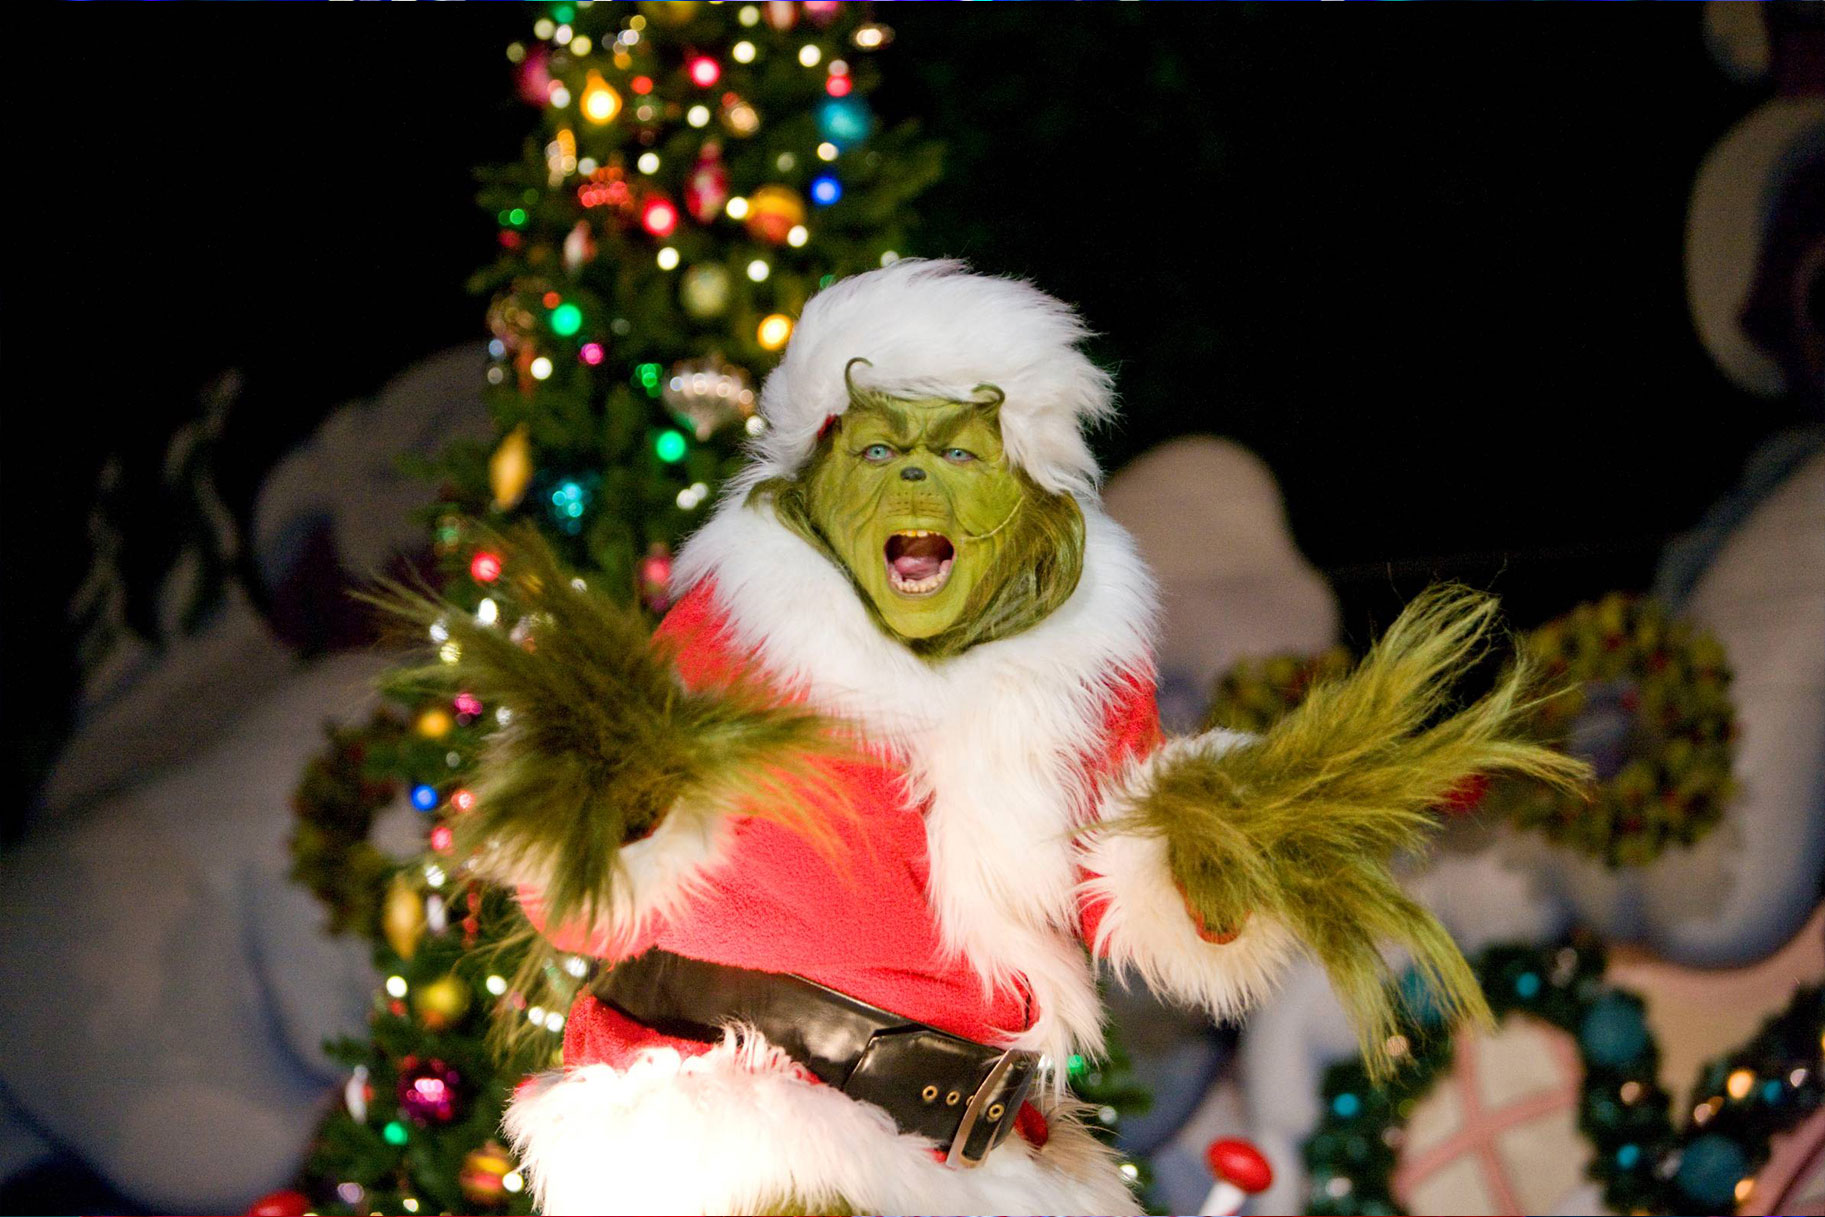 The Grinch performing suring the Holiday special at Universal Studios